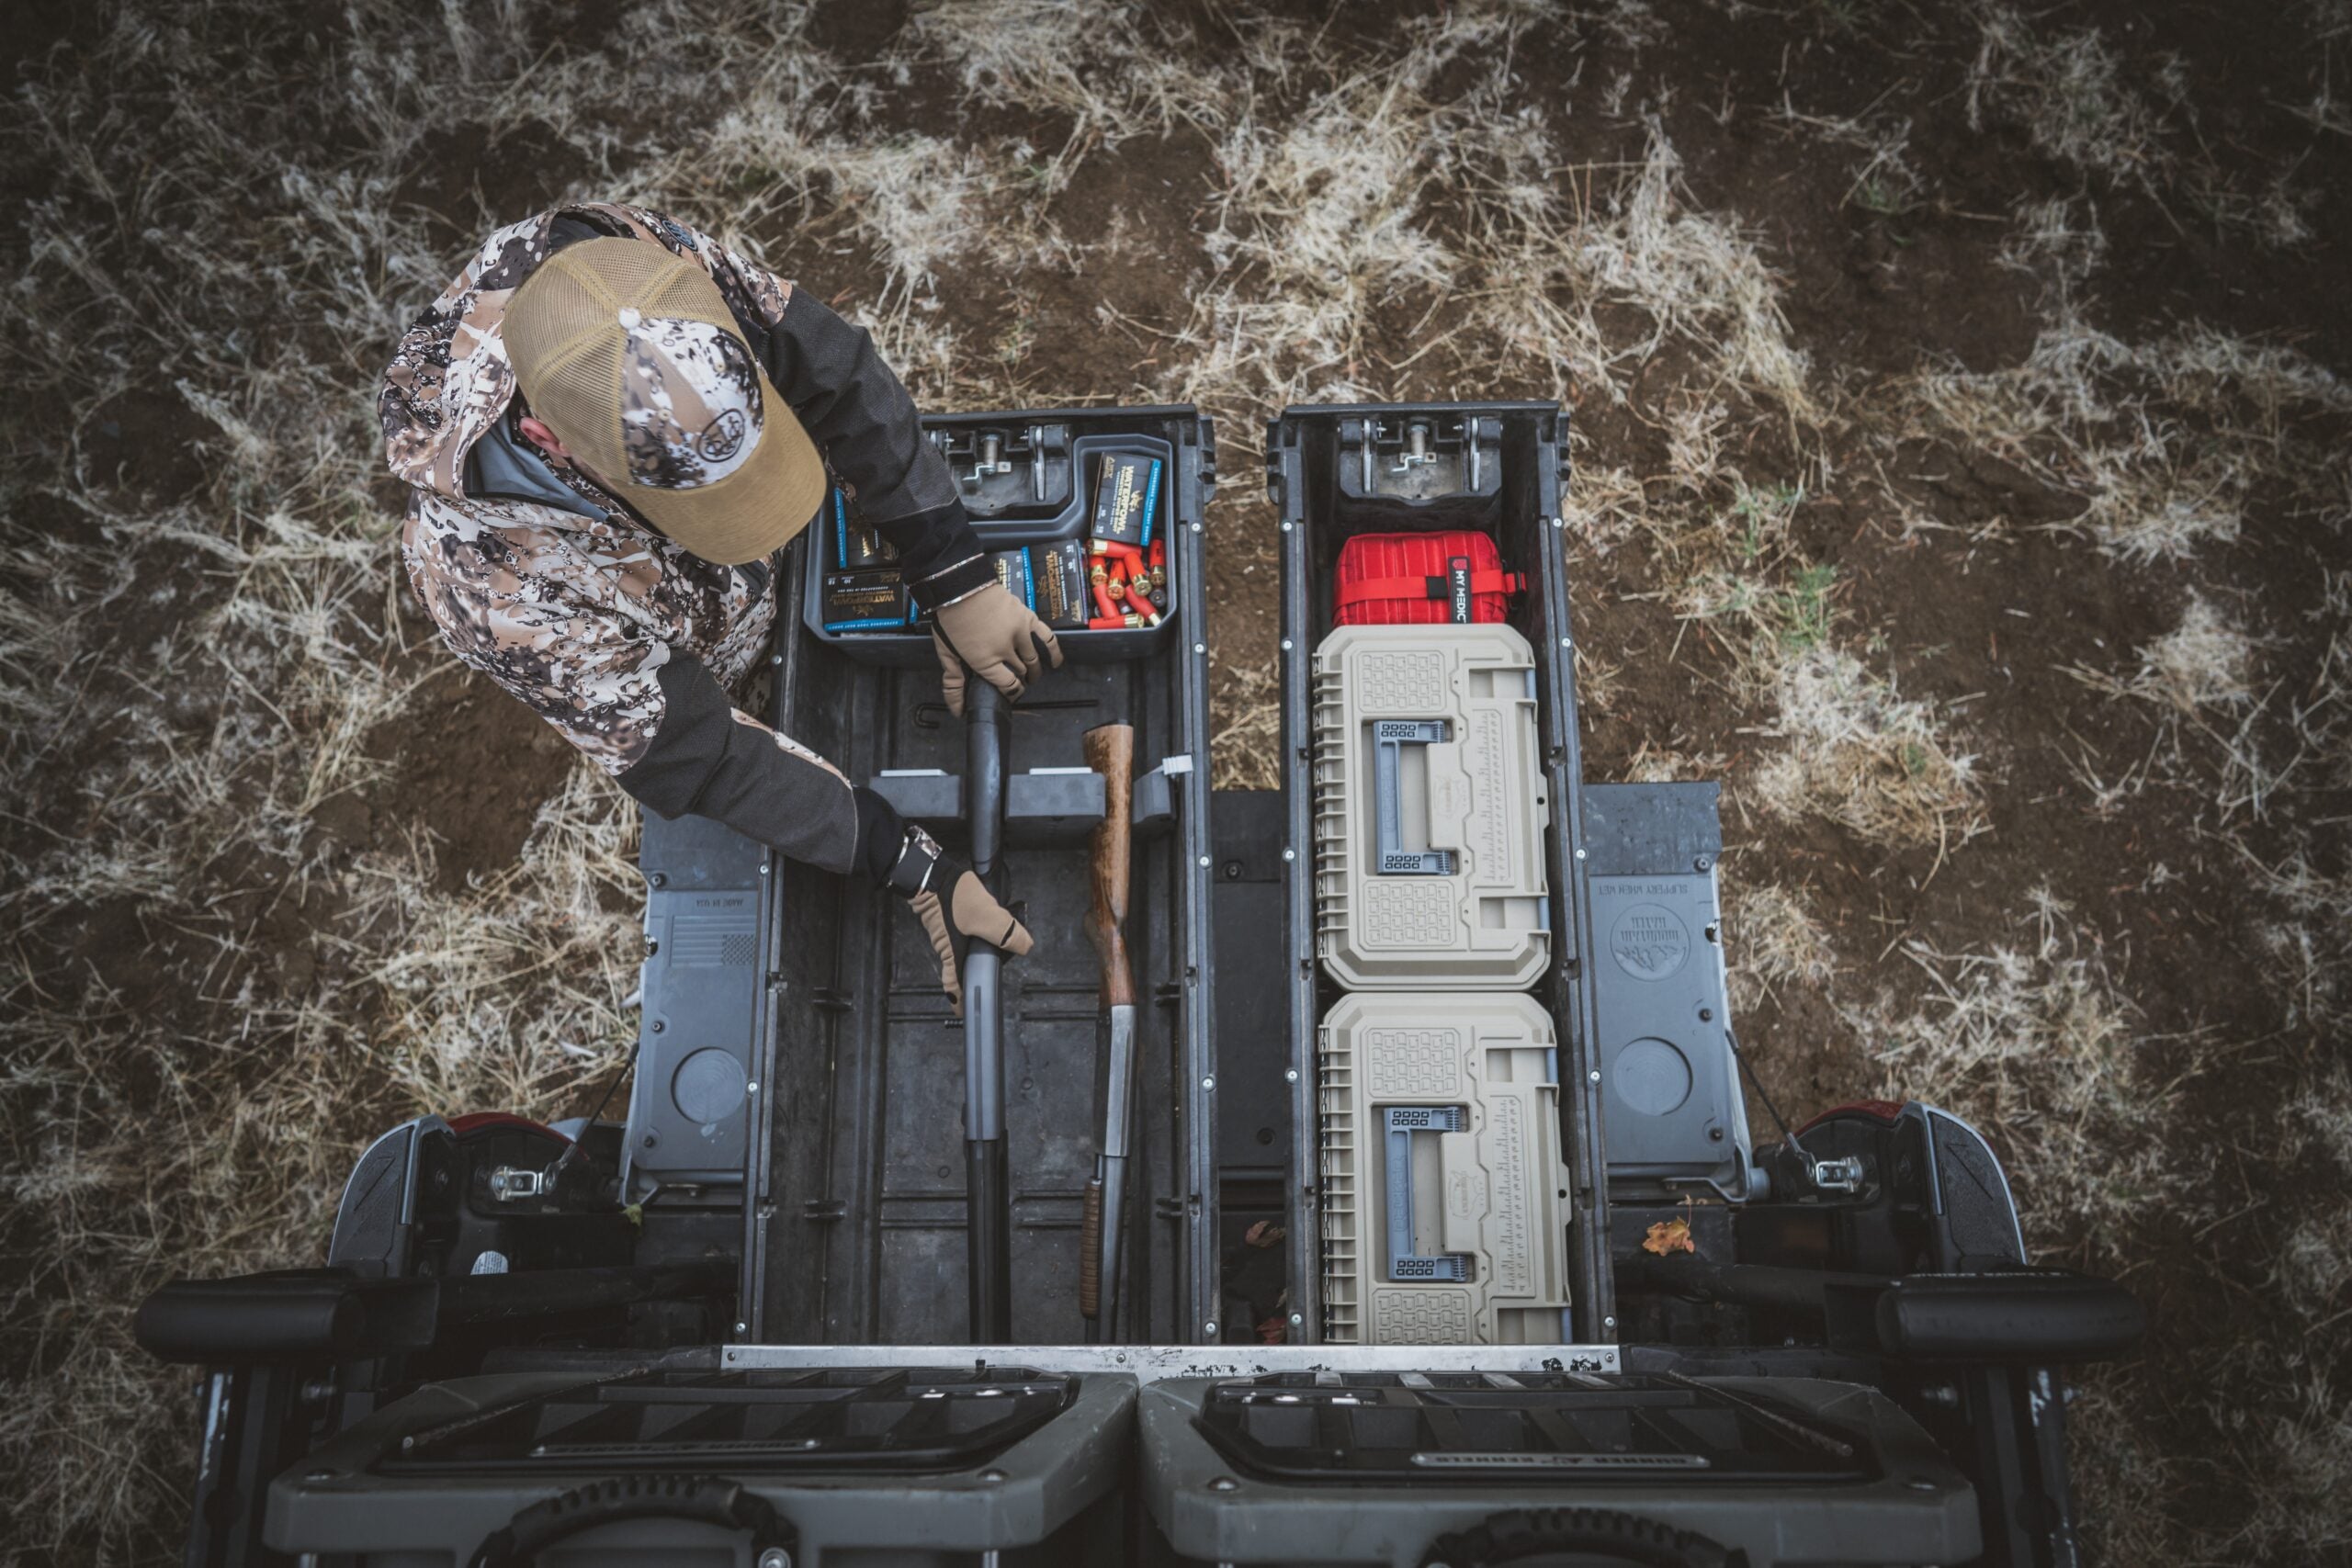 OffroadAlliance.com - Pack up and head out! The Decked drawer system is  great for so many applications. Hunting, fishing, camping, working, and  much more. Possibly the best way to organize your bed